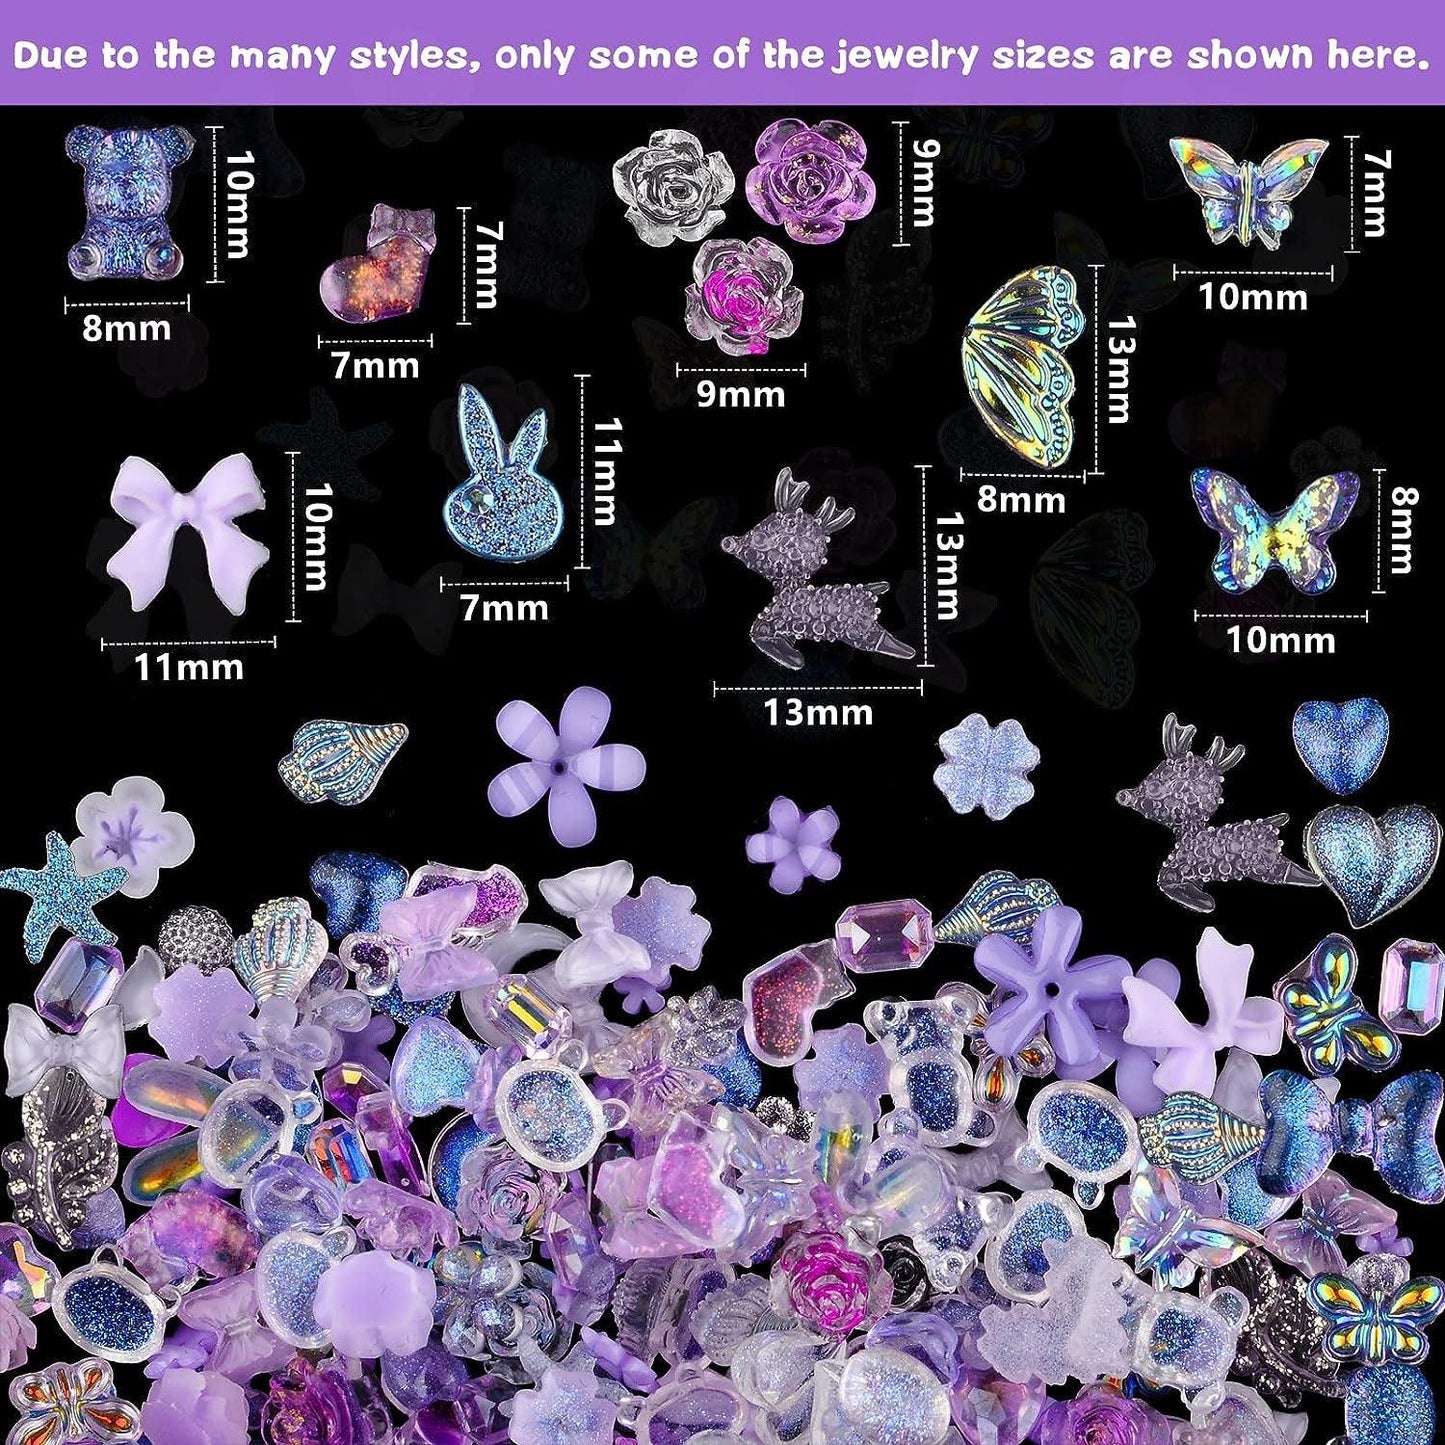 100 Pieces 3D Resin Butterfly Bear Nail Charms Rose Flower Peach Skirt Bow Deer Snake Rabbit Animal Shaped Nail Art Rhinestones Pearls for DIY Nail Art Decoration Making Craft (Purple) - WoodArtSupply